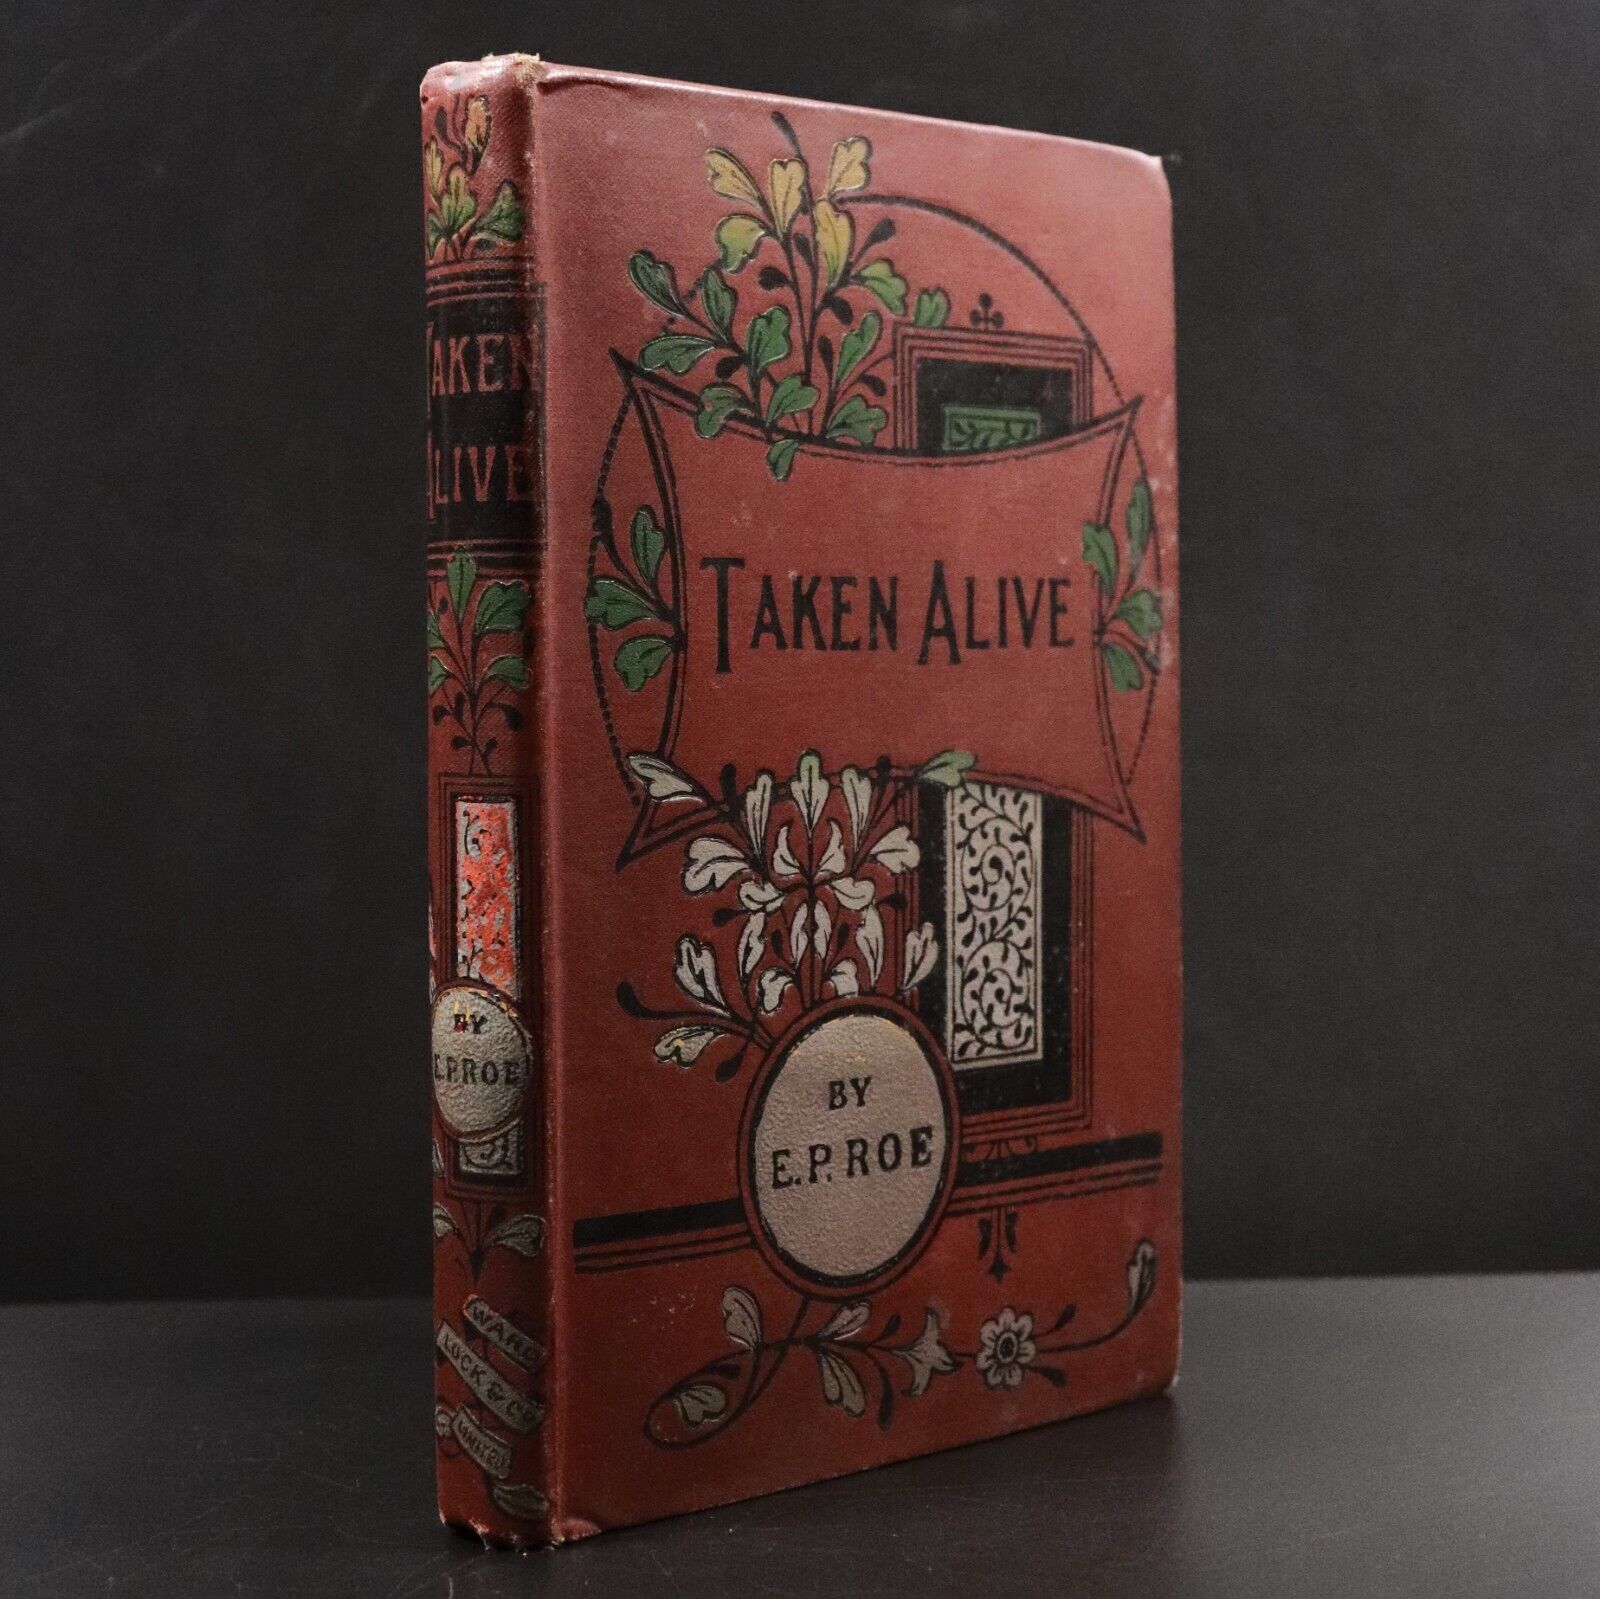 c1910 Taken Alive & Other Stories by E.P. Roe Antique Fiction Book